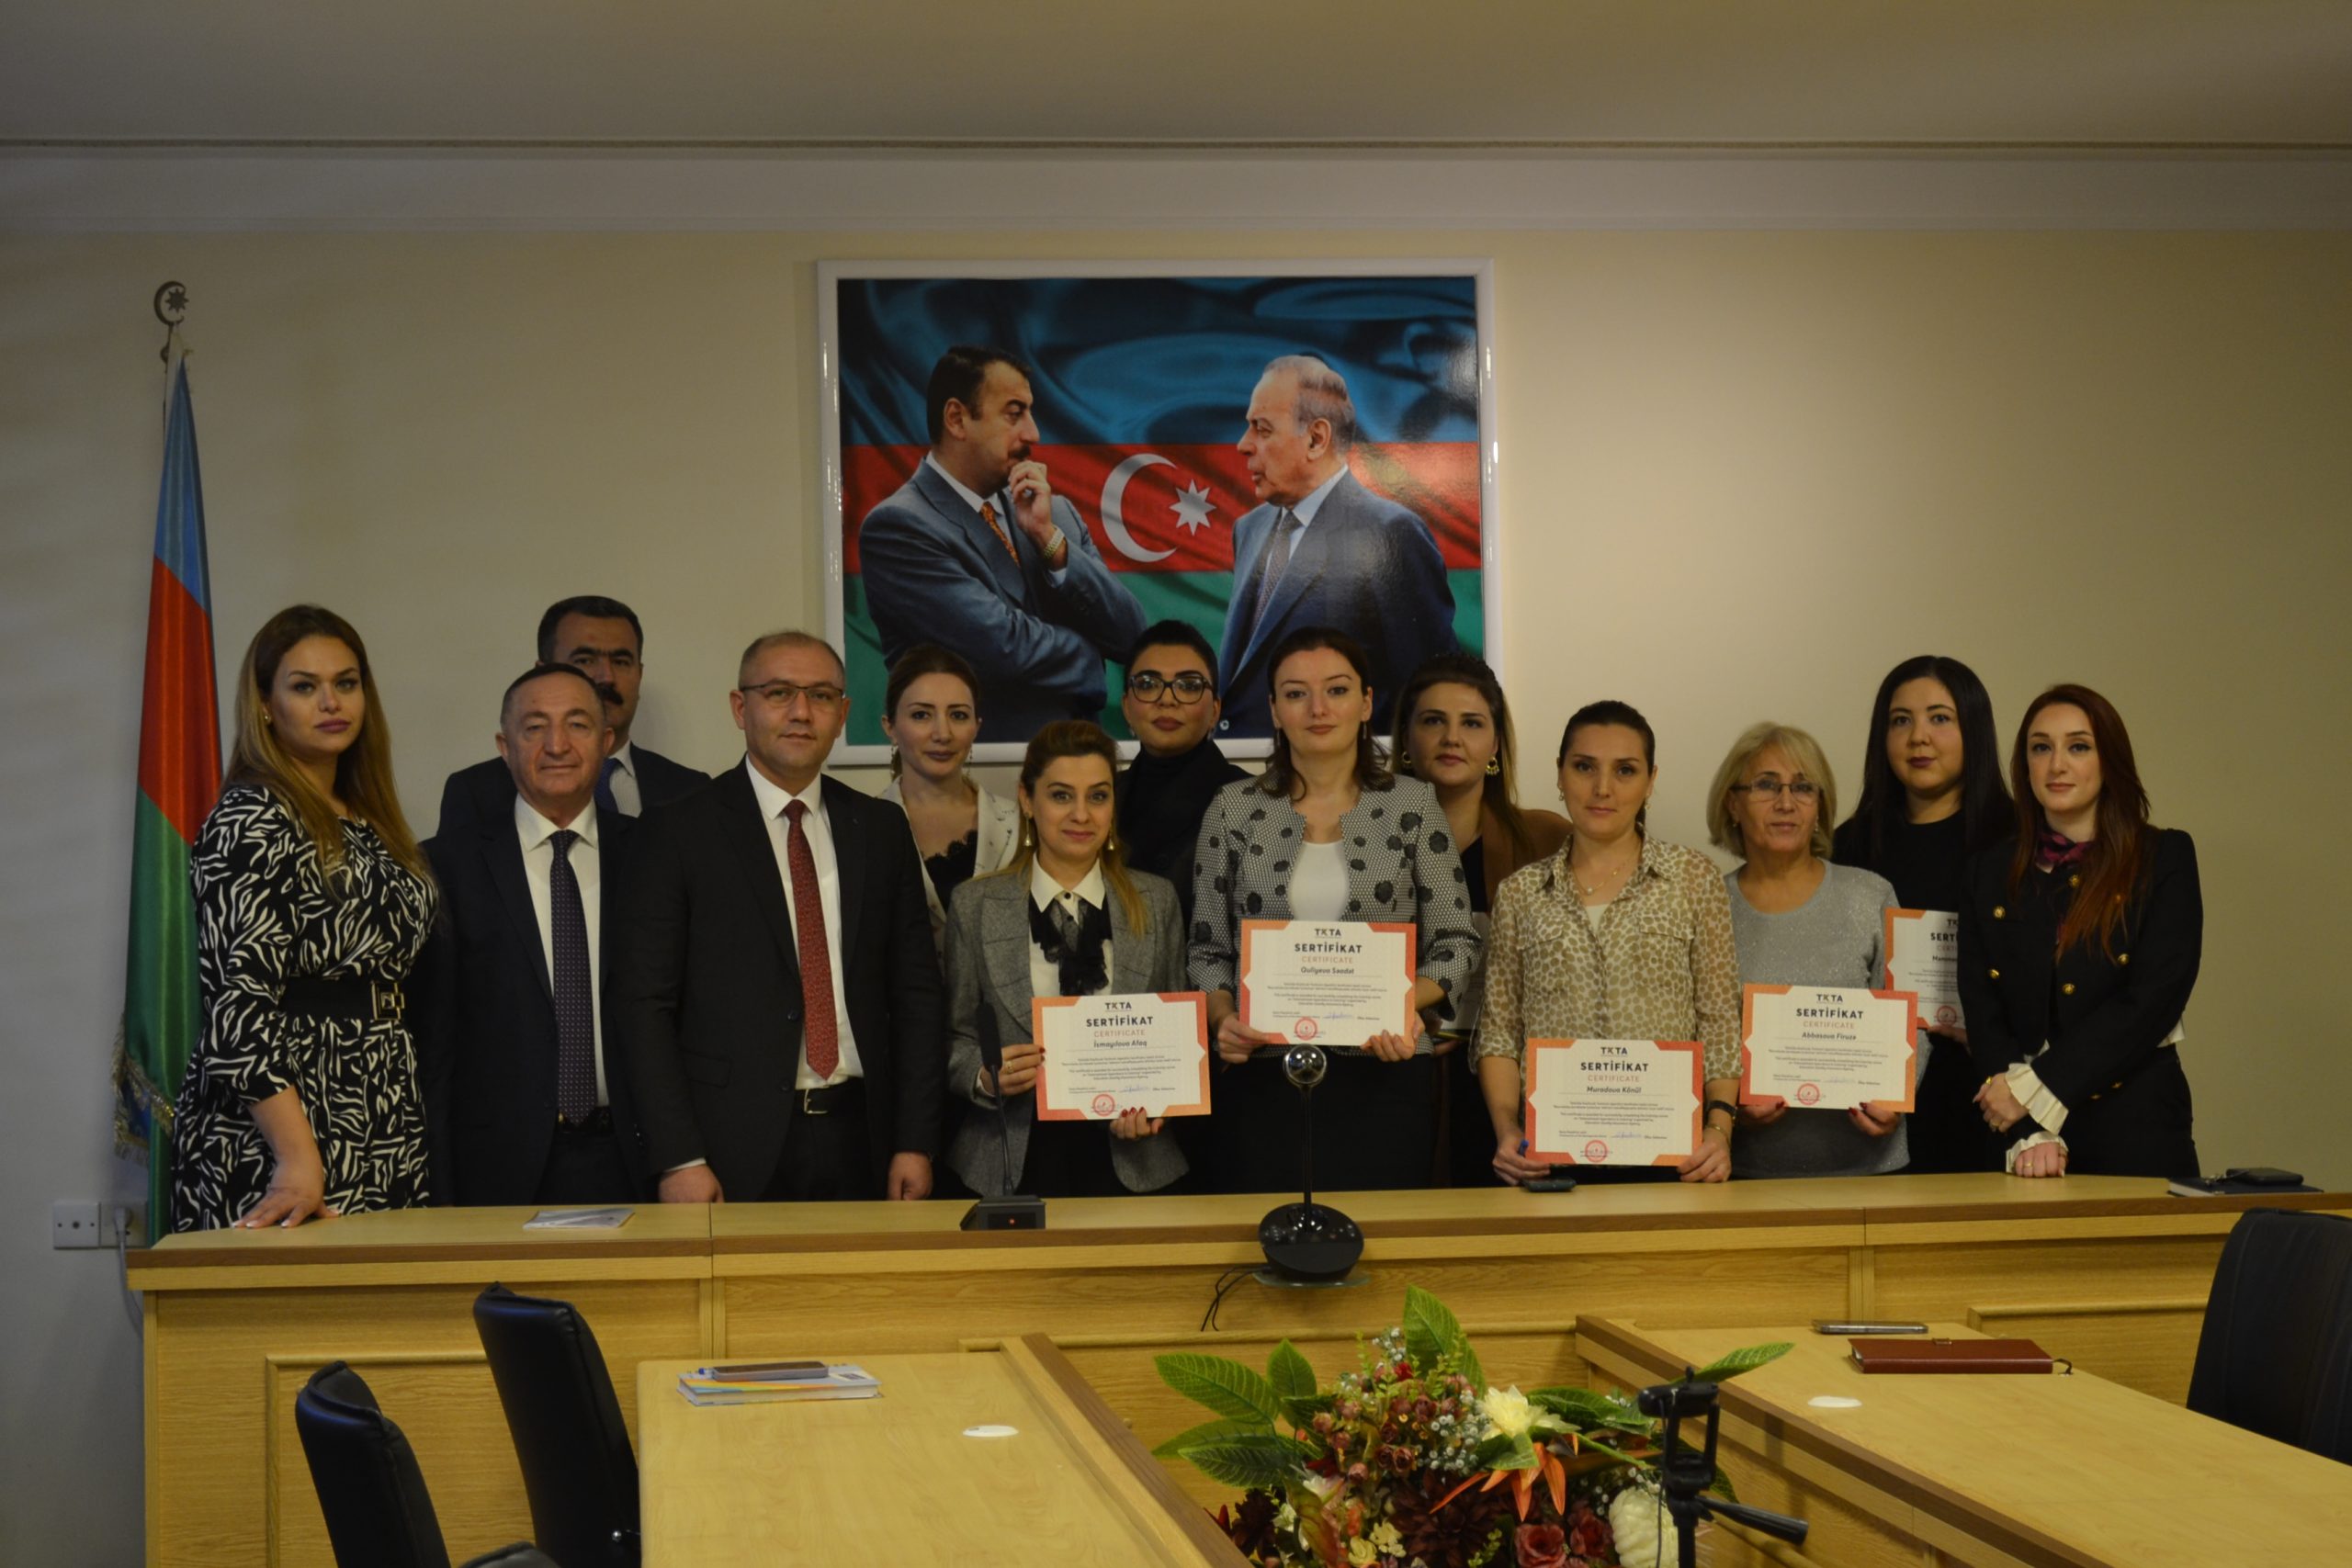 The awarding ceremony of the “Tutoring in international practice” training organized within the framework of the contract concluded between TKTA and AKU was held